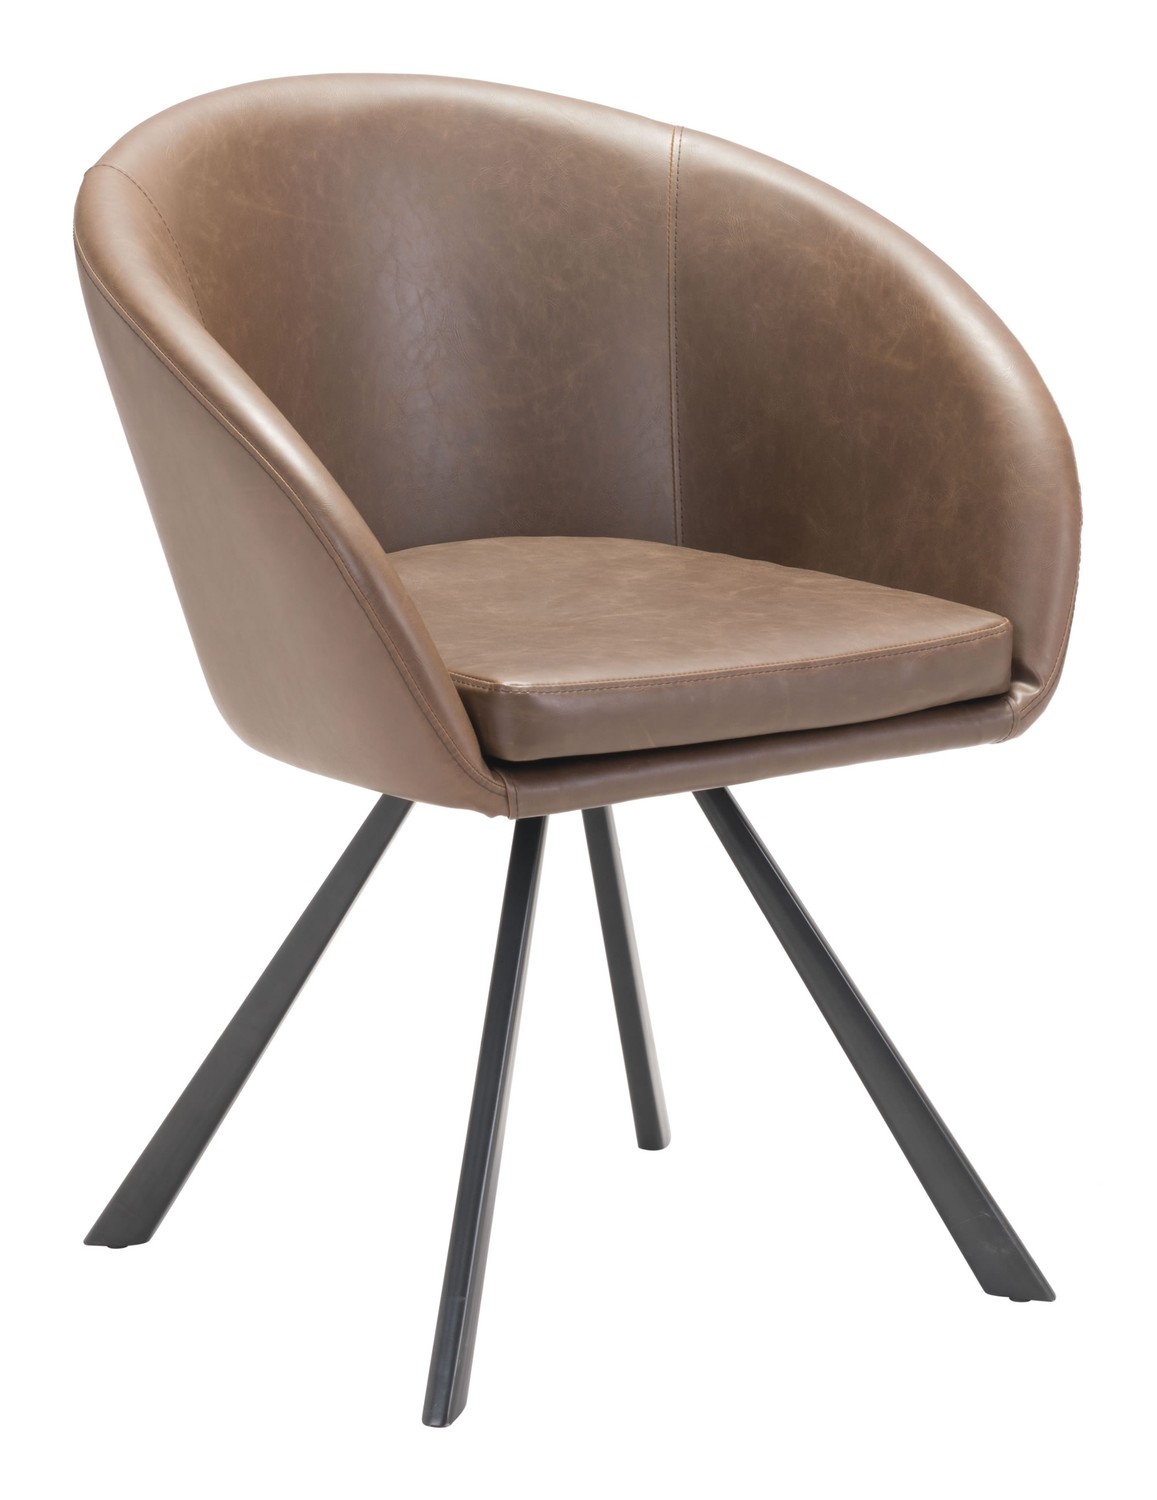 25.2" x 22.4" x 31.9" Espresso, Leatherette, Steel, Dining Chair